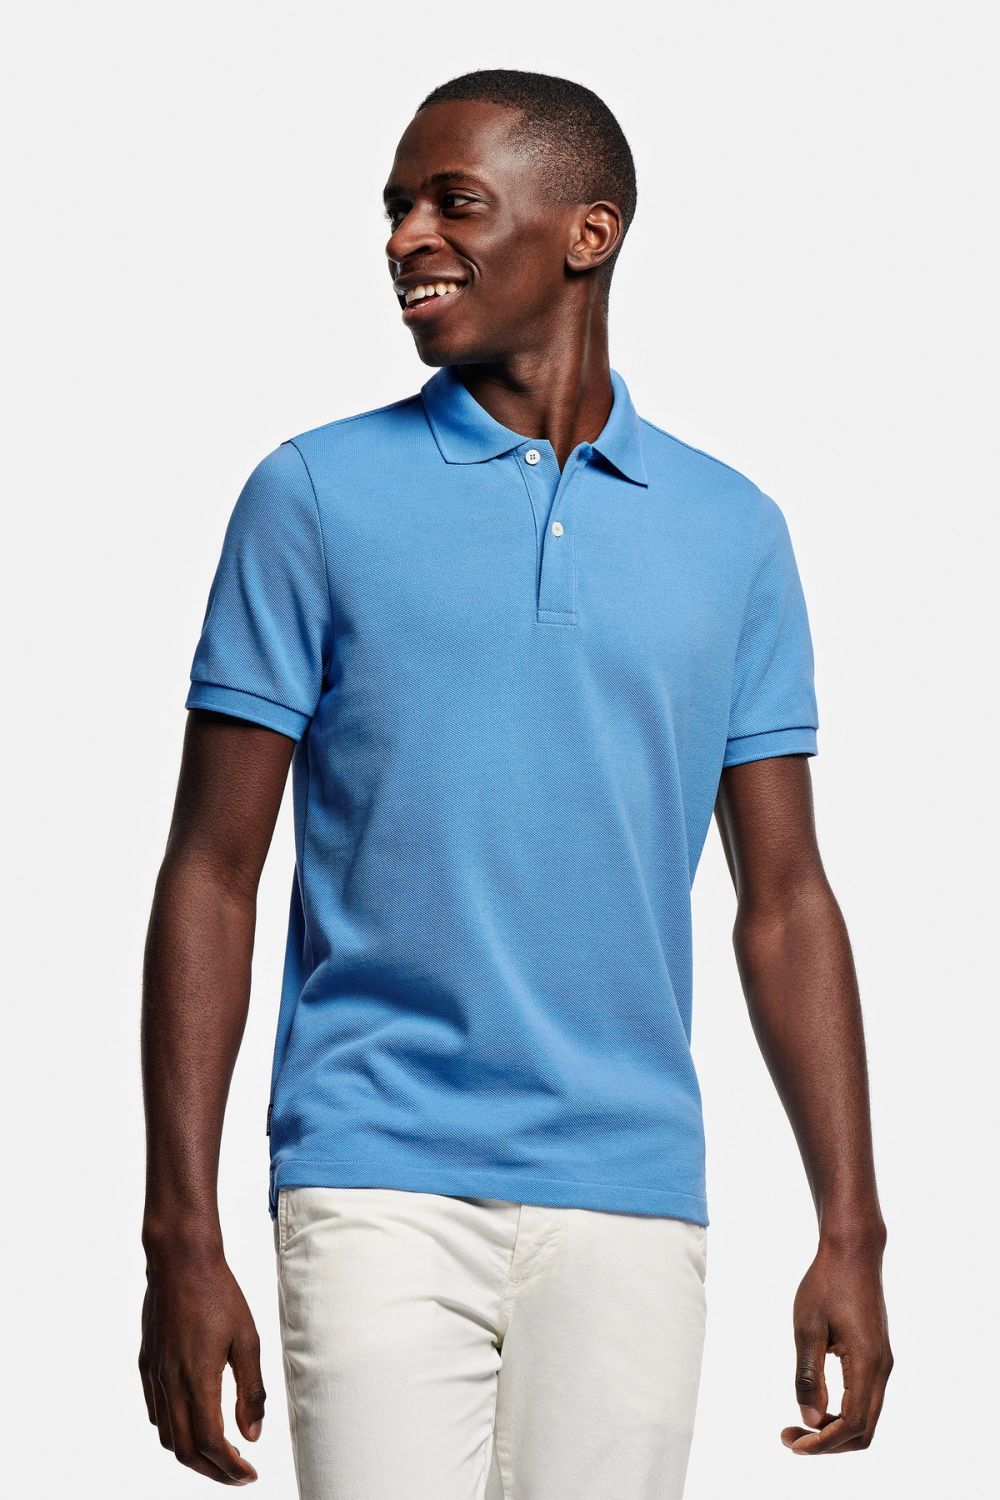 Boulevards - The Classic Polo